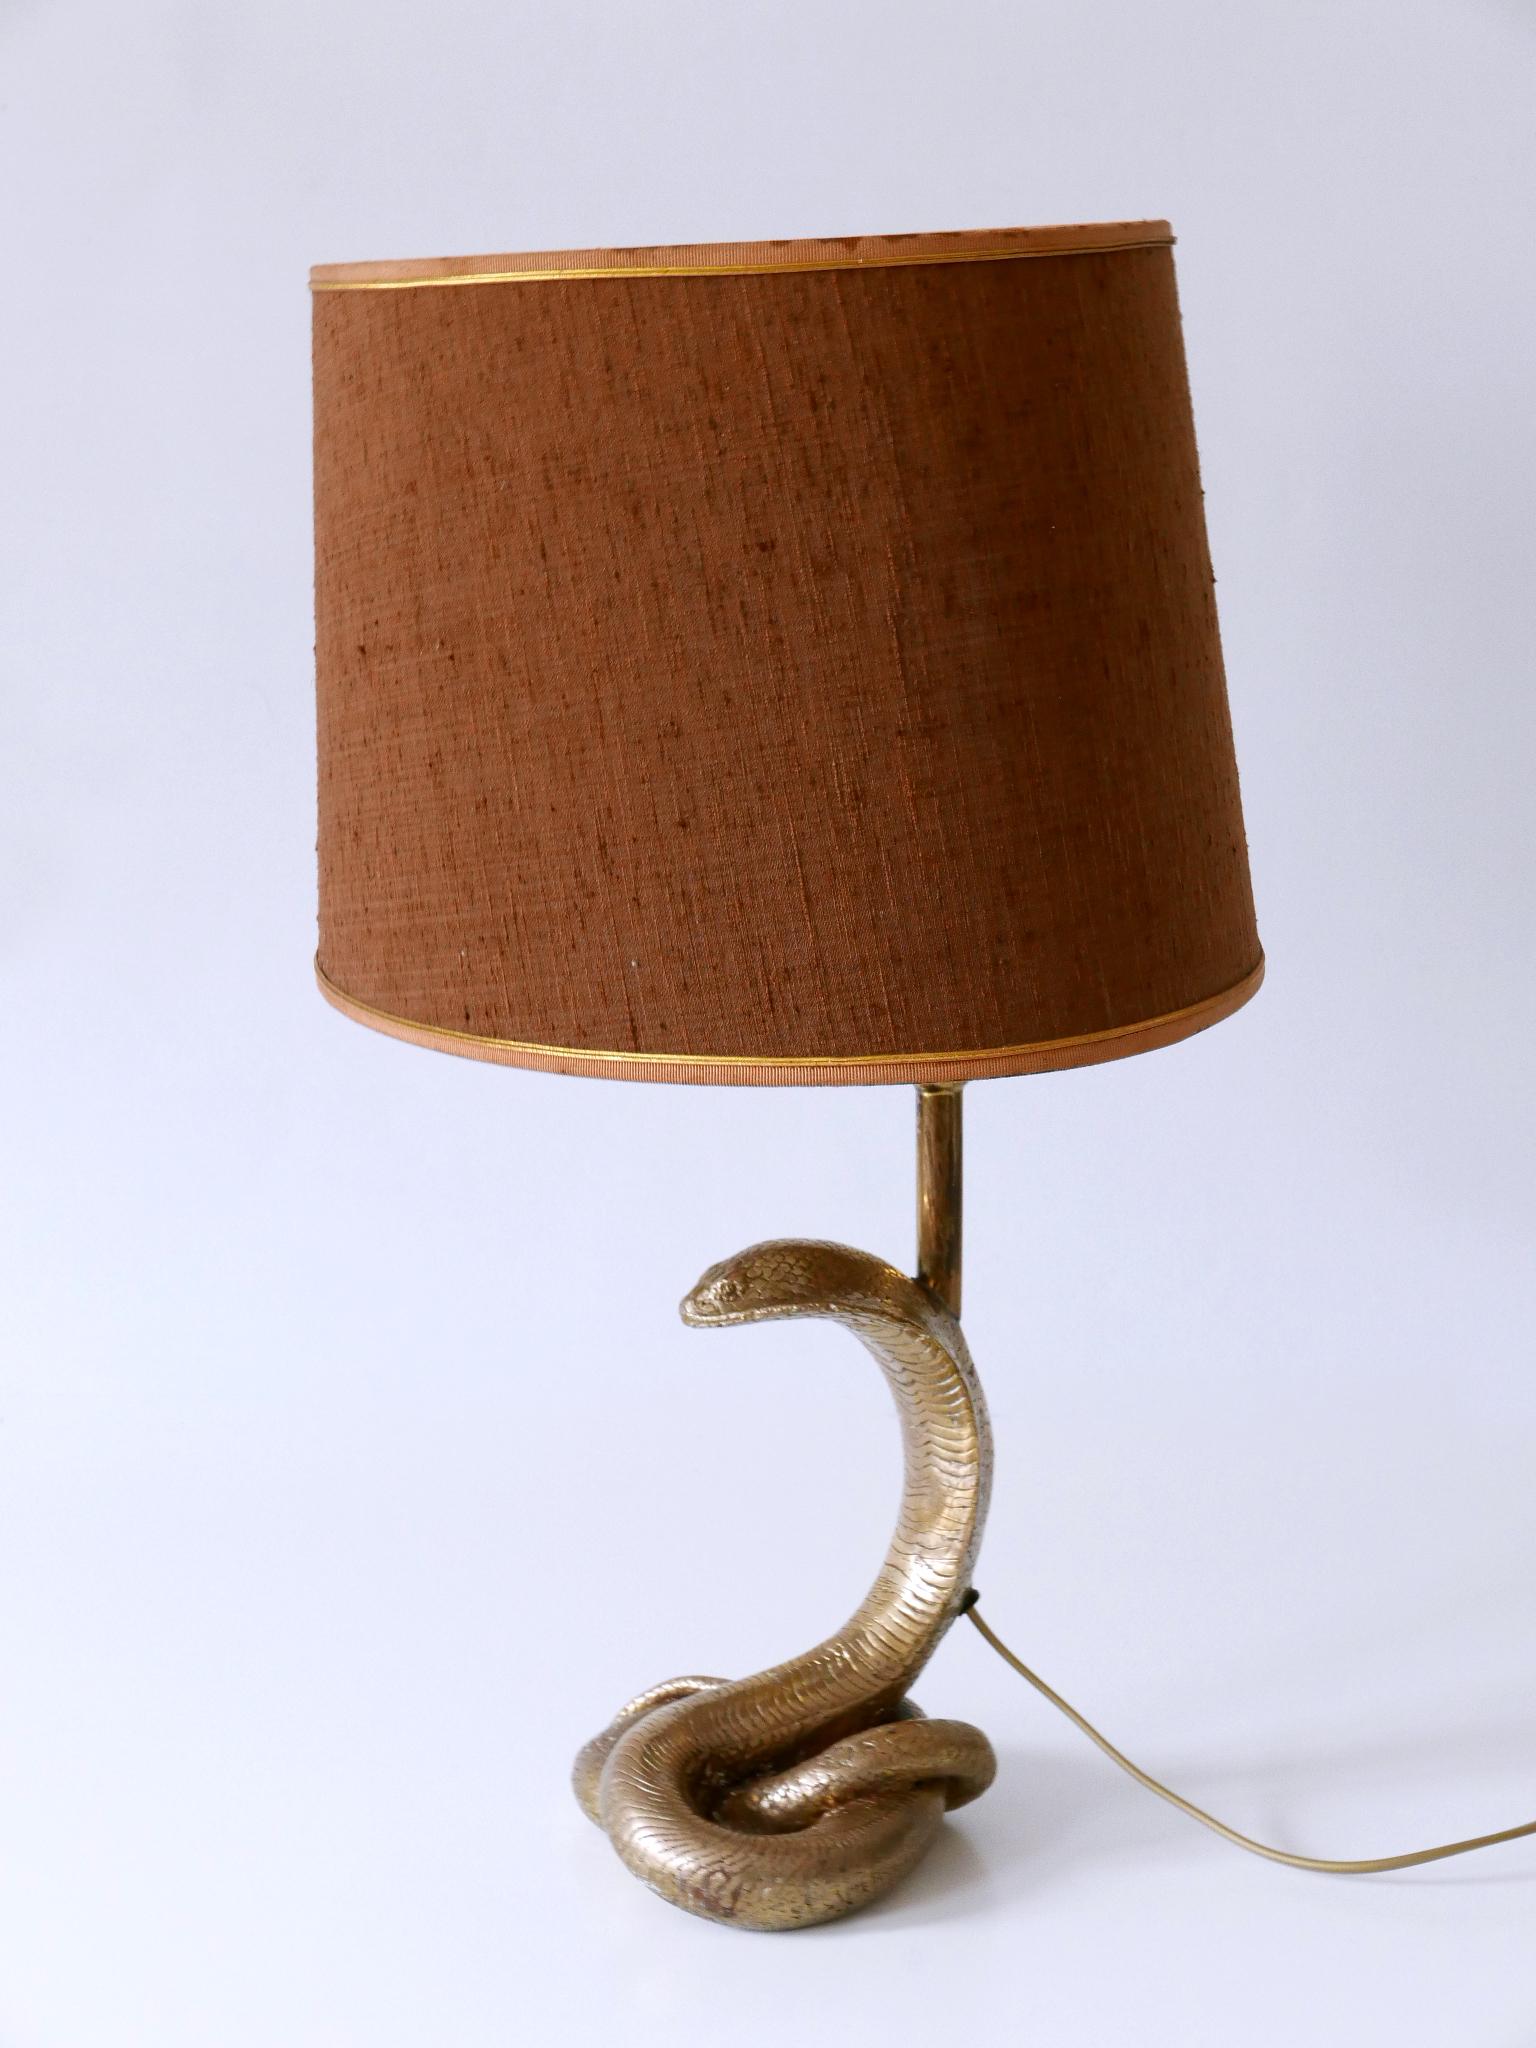 Exceptional Mid-Century Modern Cobra Table Lamp by Maison Jansen France 1970s For Sale 1